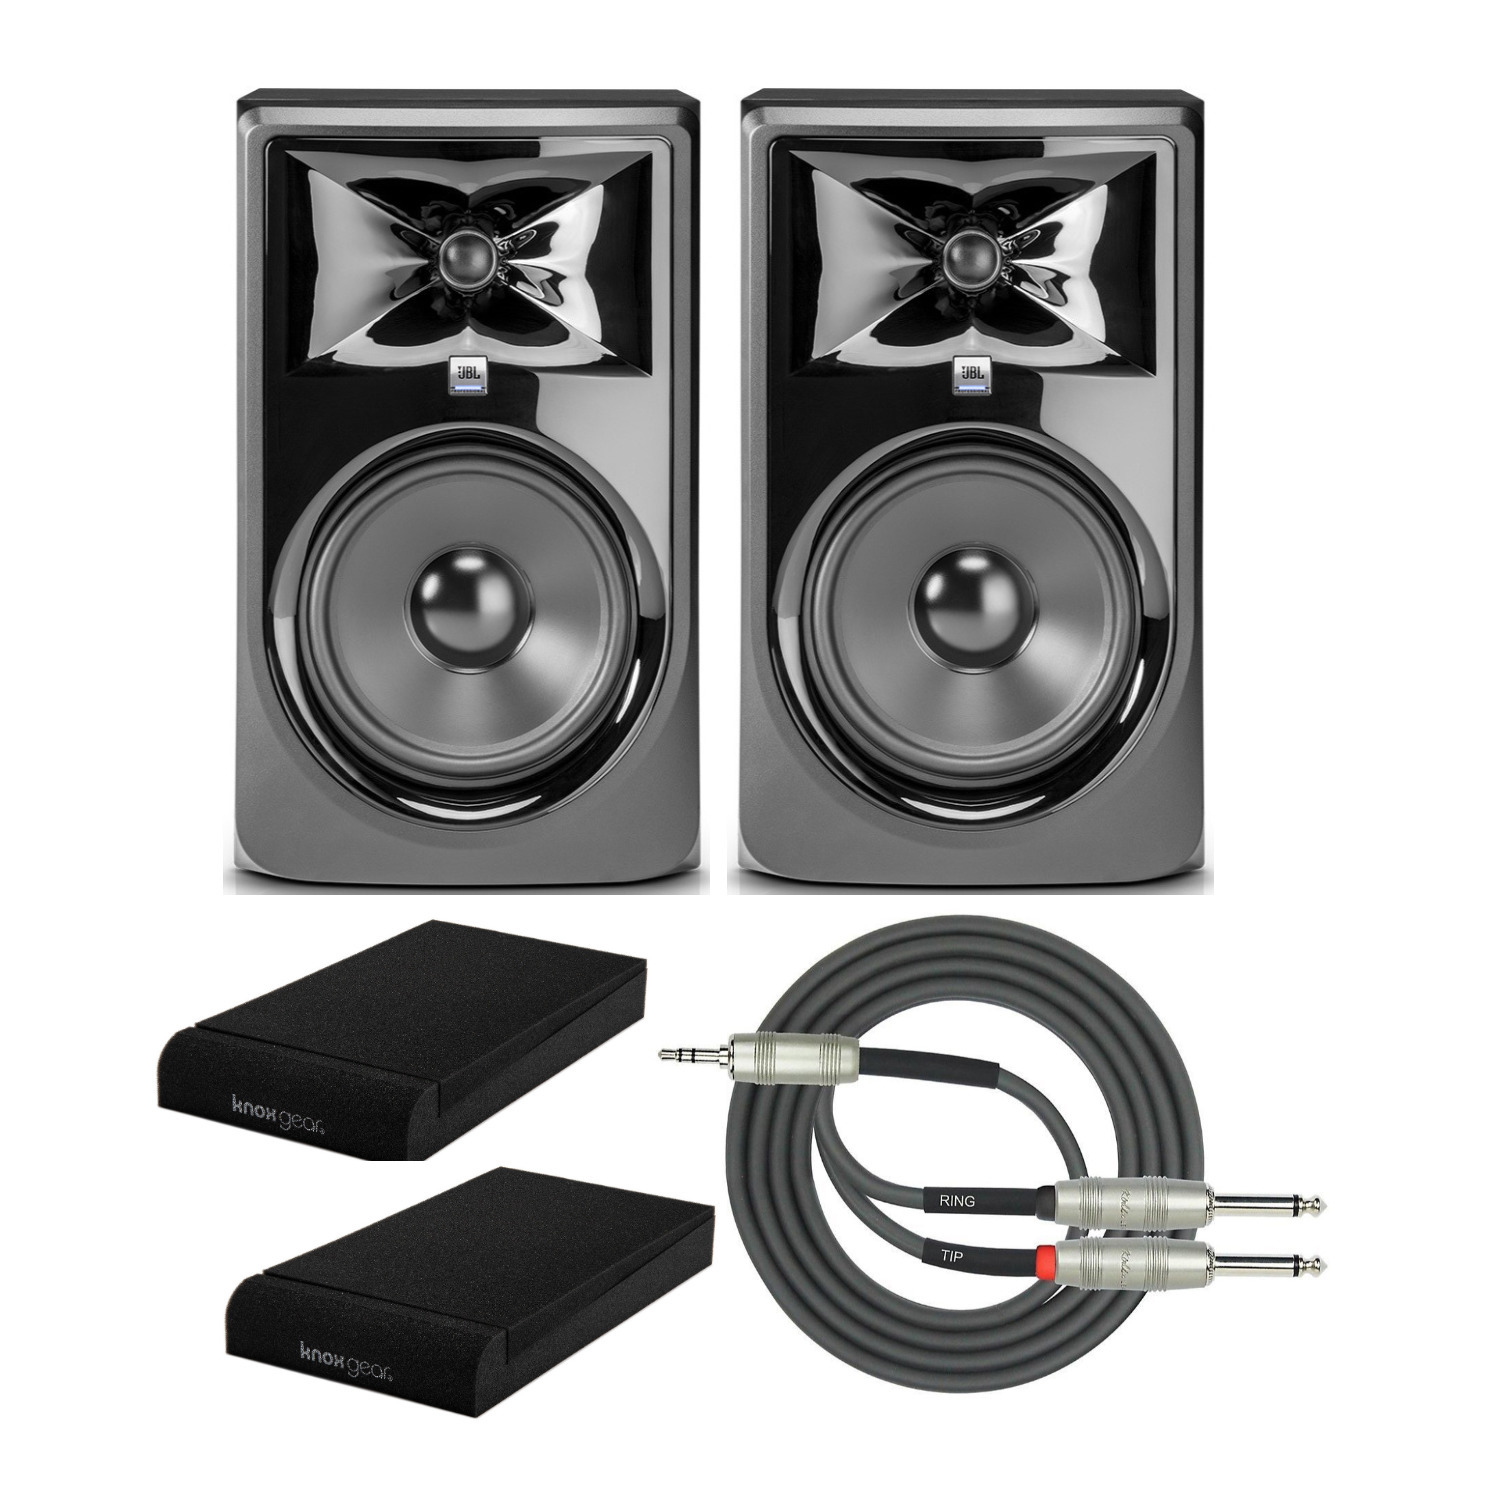 308PMKII_K7 JBL Powered 8-inch Two-Way Studio Monitor (Pair) with Accessory